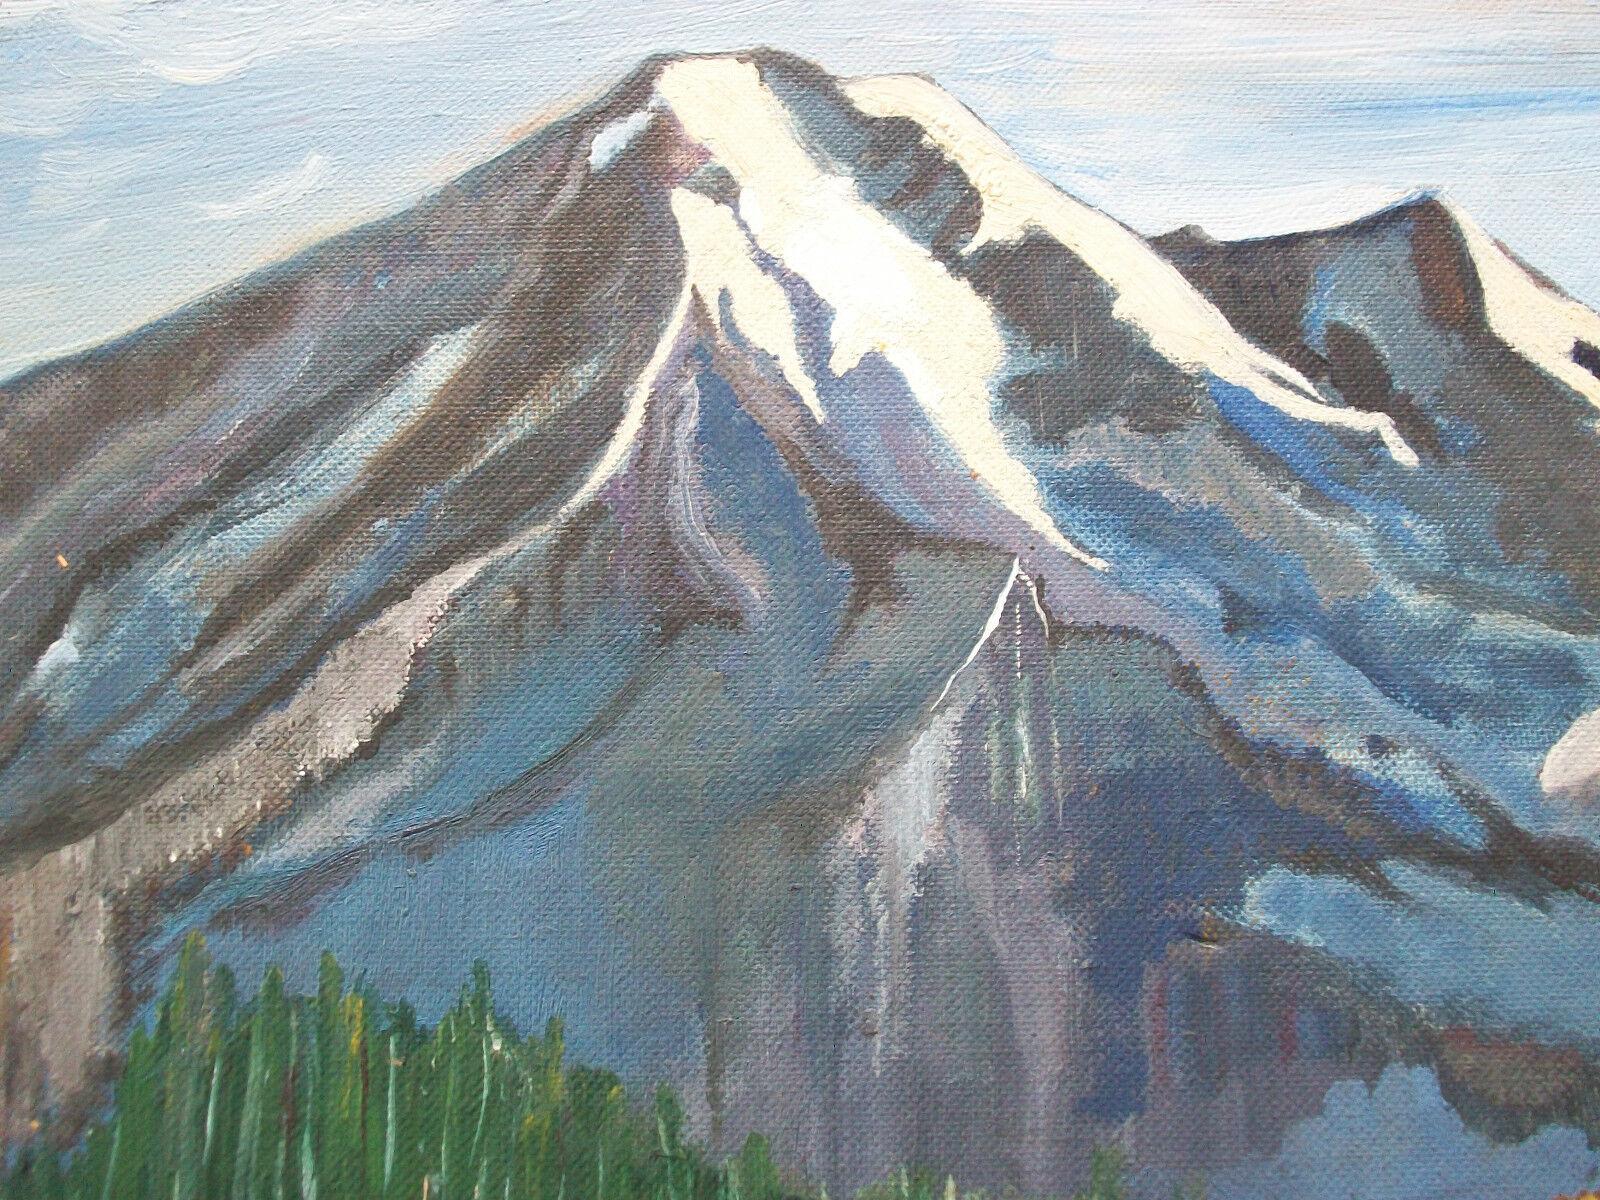 Mid Century folk art mountain landscape oil painting on artist's canvas board - unframed - initialed lower right - Canada - circa 1956.

Good vintage condition - no loss - no apparent restoration - minor grime & scuffs from age and use - ready to